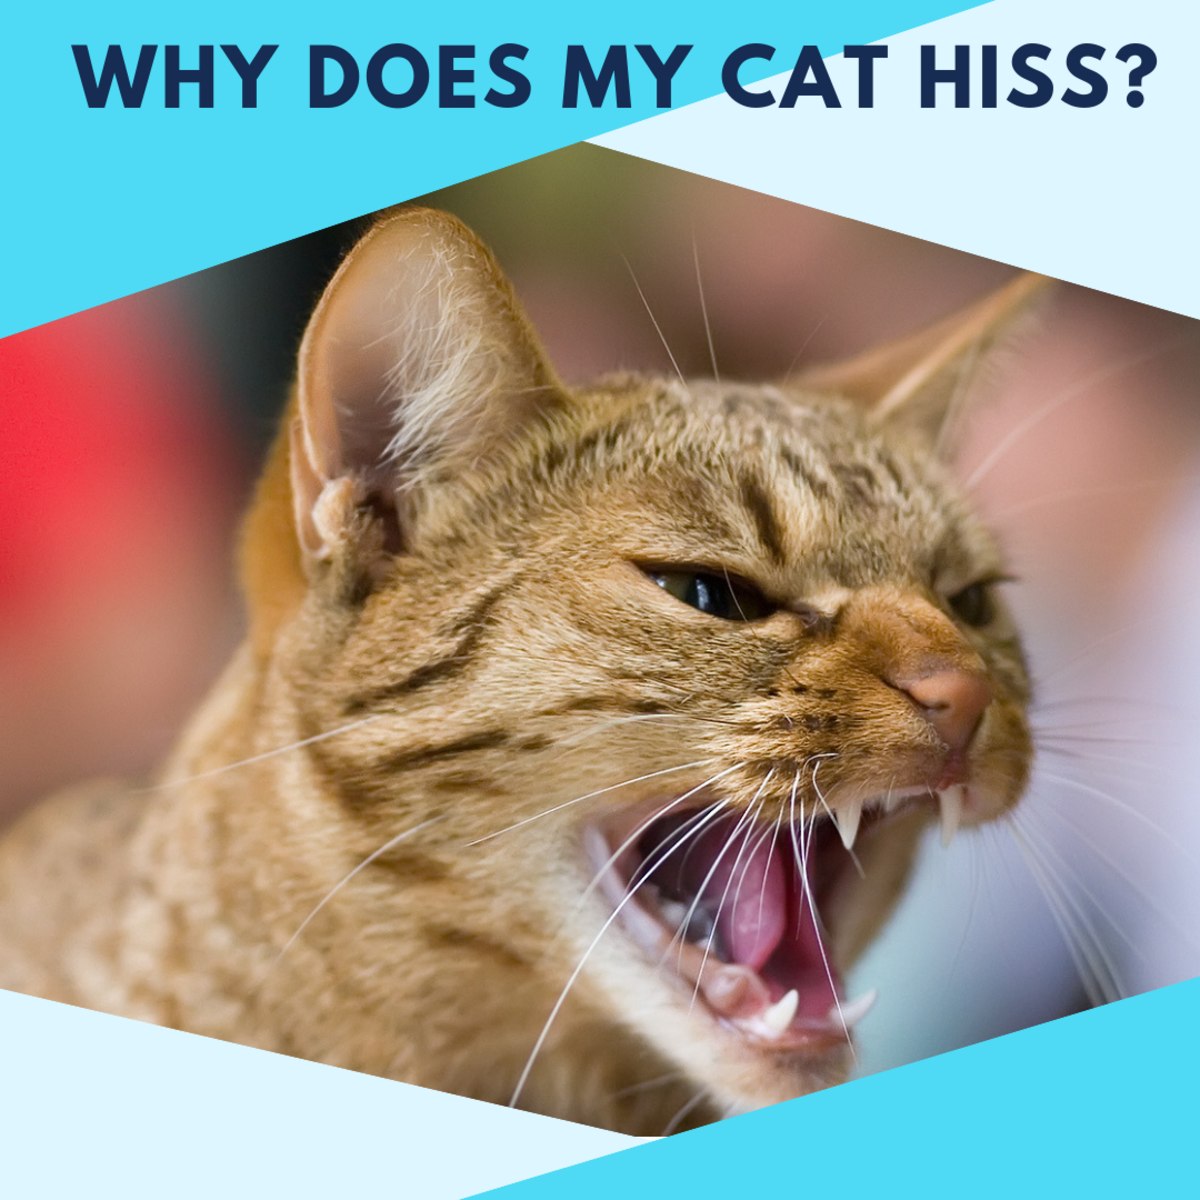 Why Is My Cat Hissing?